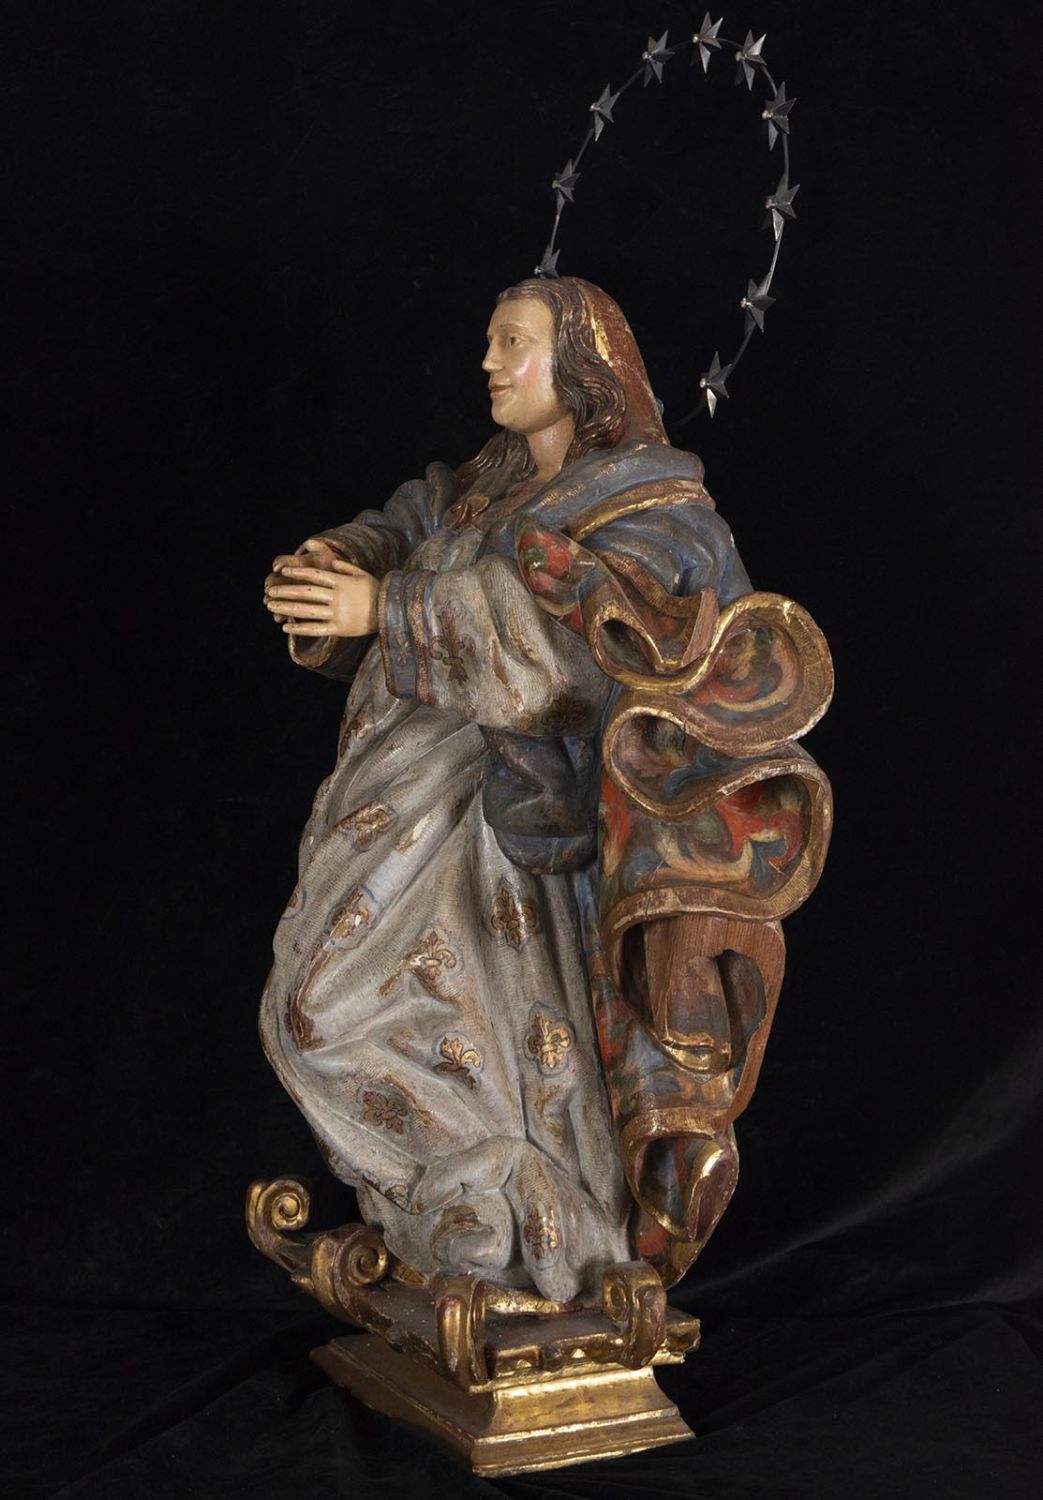 Large Portuguese Baroque Immaculate Virgin with Crown in silver, 18th century Portuguese school - Image 2 of 3